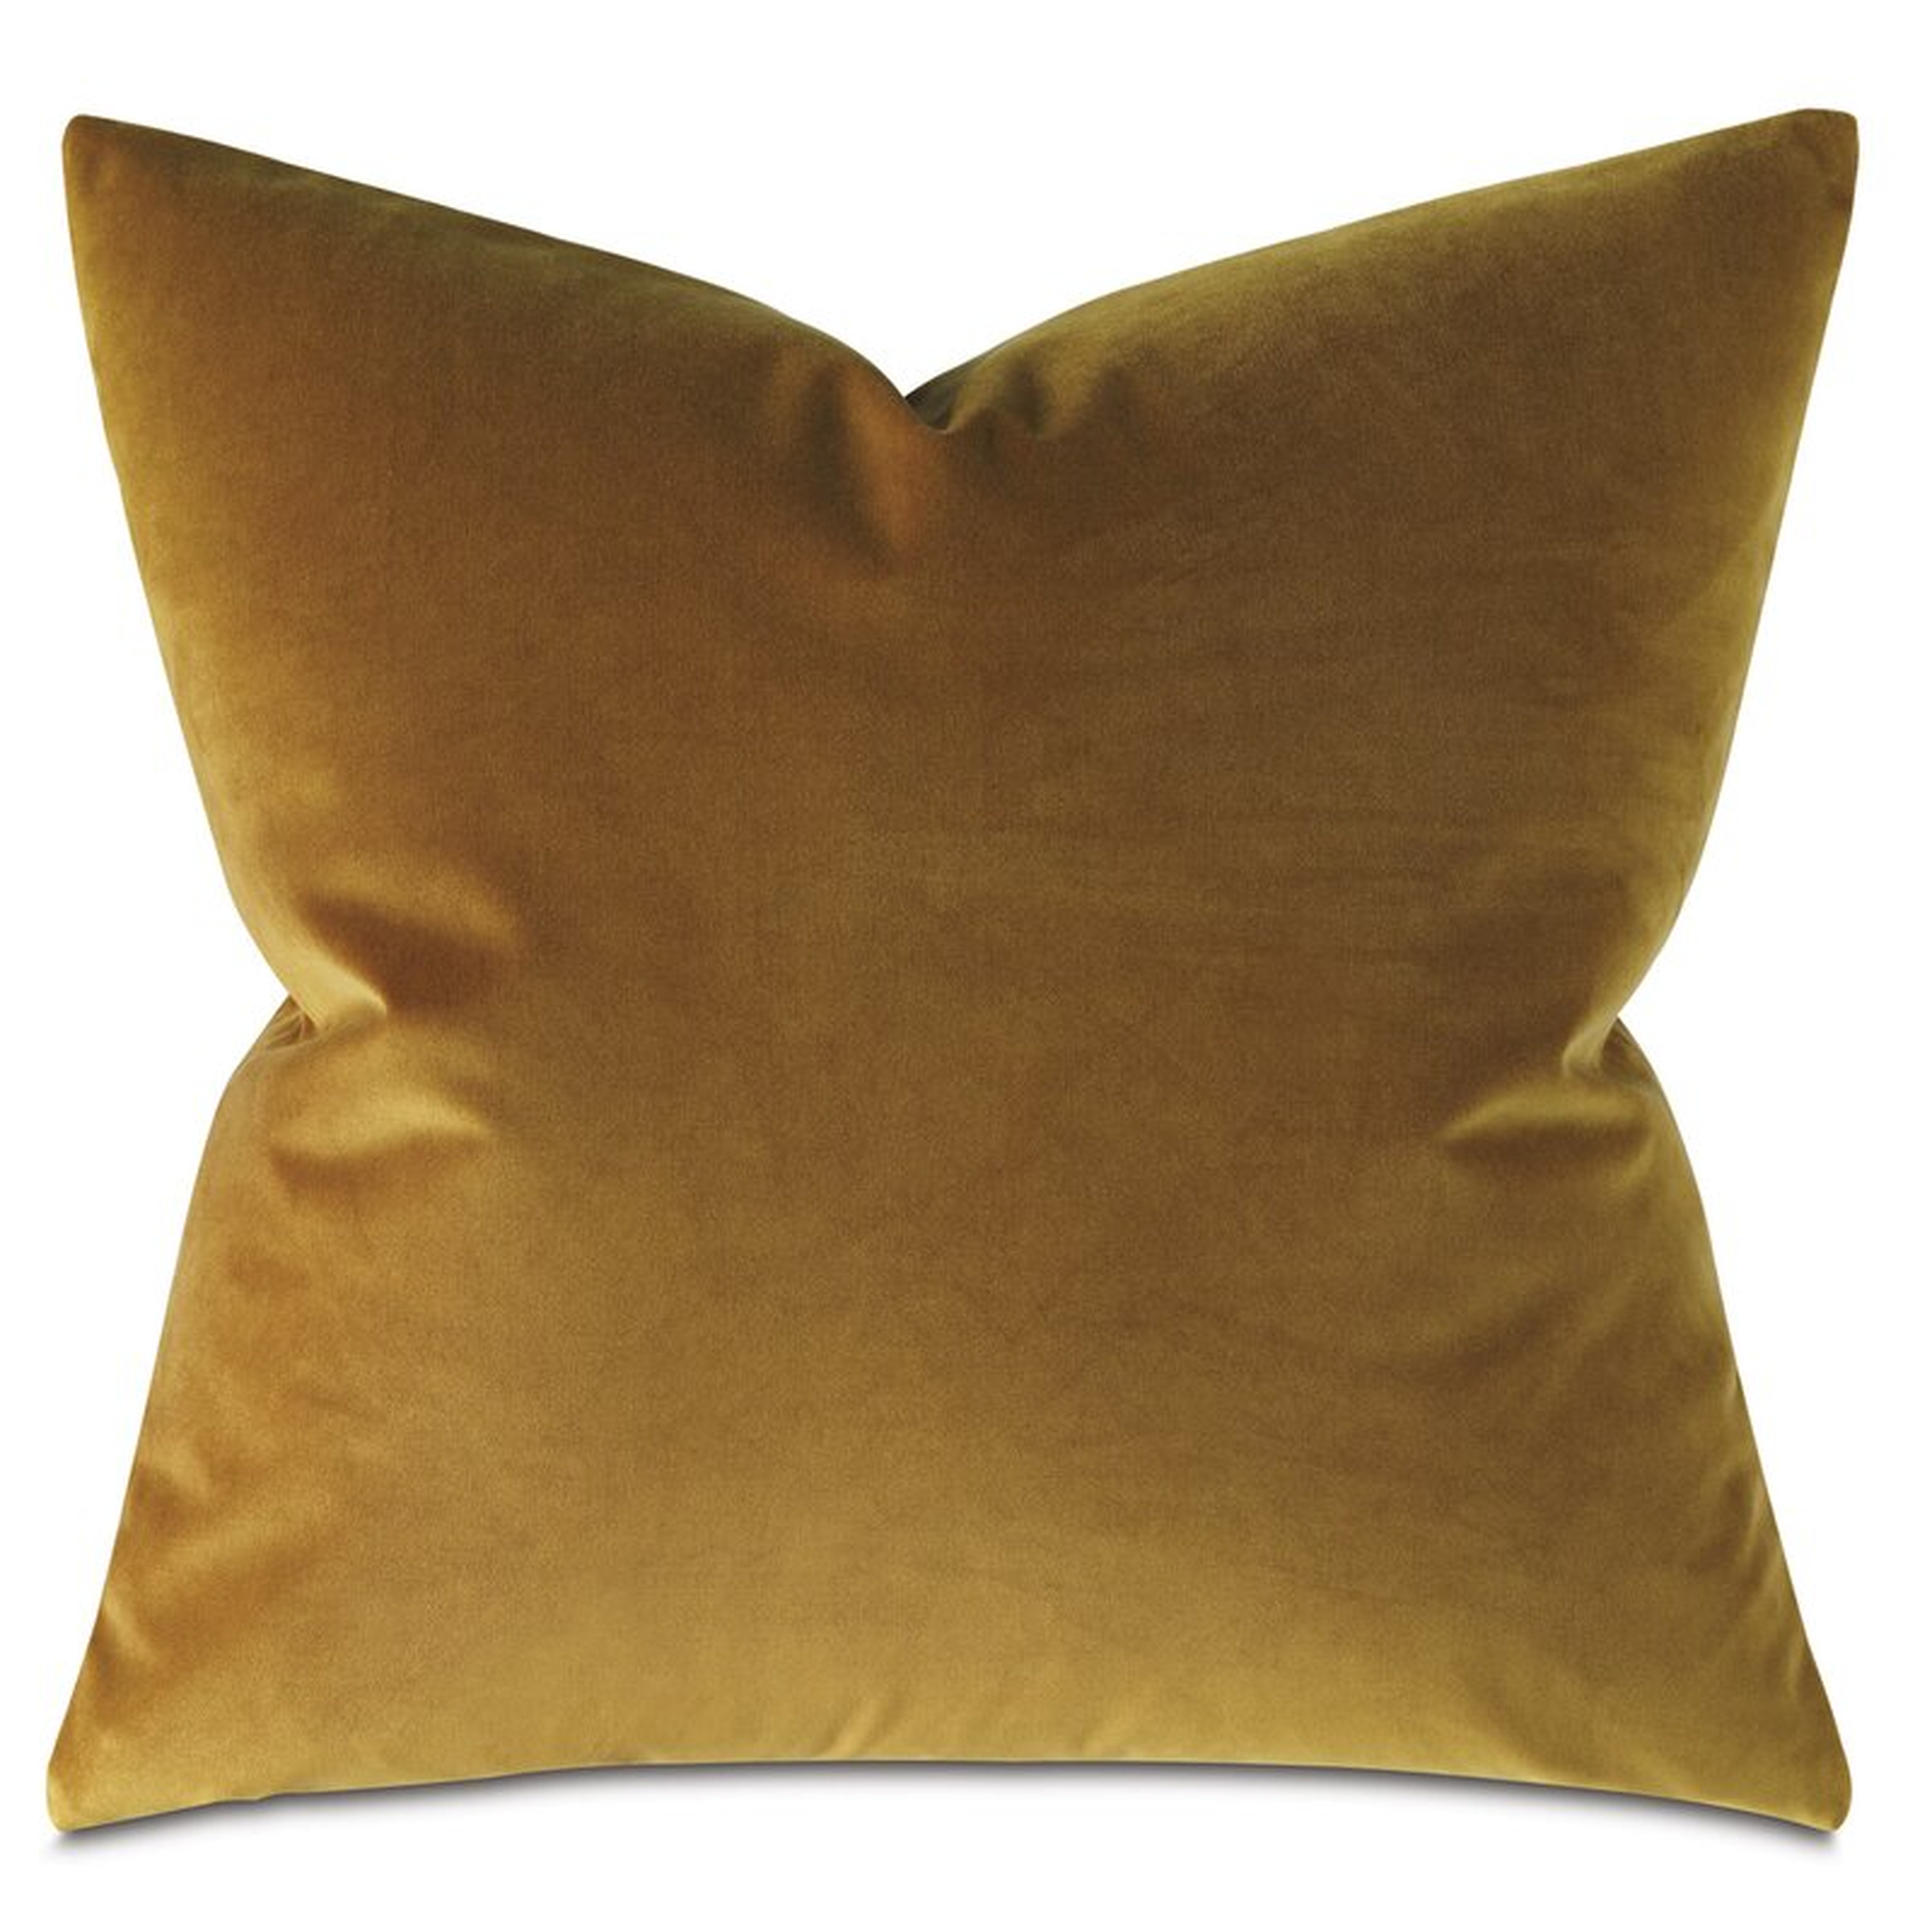 Eastern Accents James Uma Throw Pillow Cover & Insert - Perigold